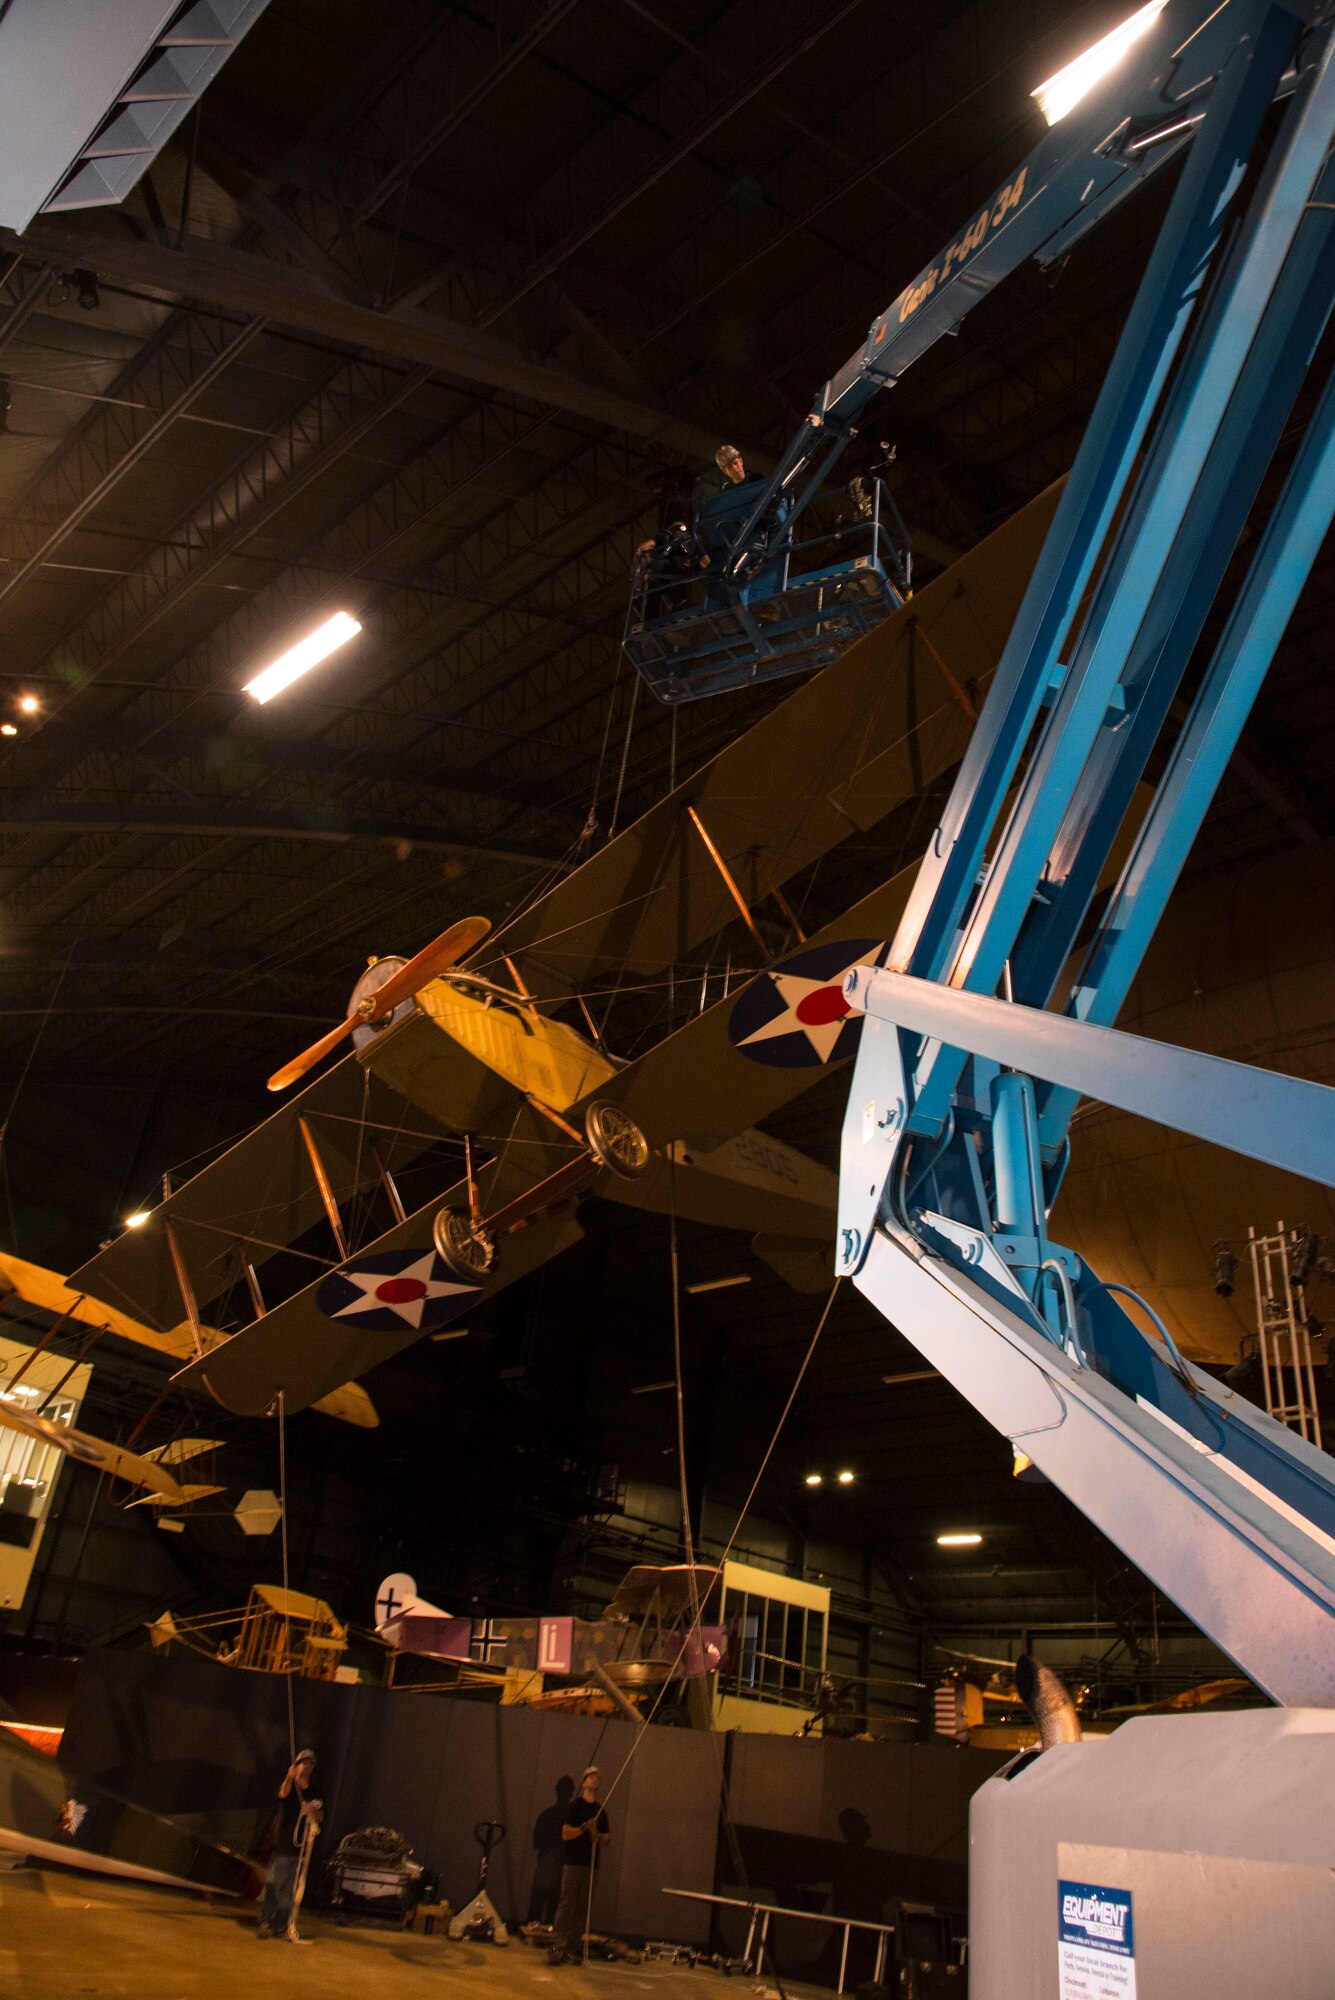 DAYTON, Ohio -- National Museum of the U.S. Air Force restoration crews lowered the Curtiss JN-4D Jenny from its hanging position on Nov. 7 2018 in the Early Years Gallery. Plans call for the Avro 504K to hang above the JN-4D after the restoration process is completed. (U.S. Air Force photo by Ken LaRock)